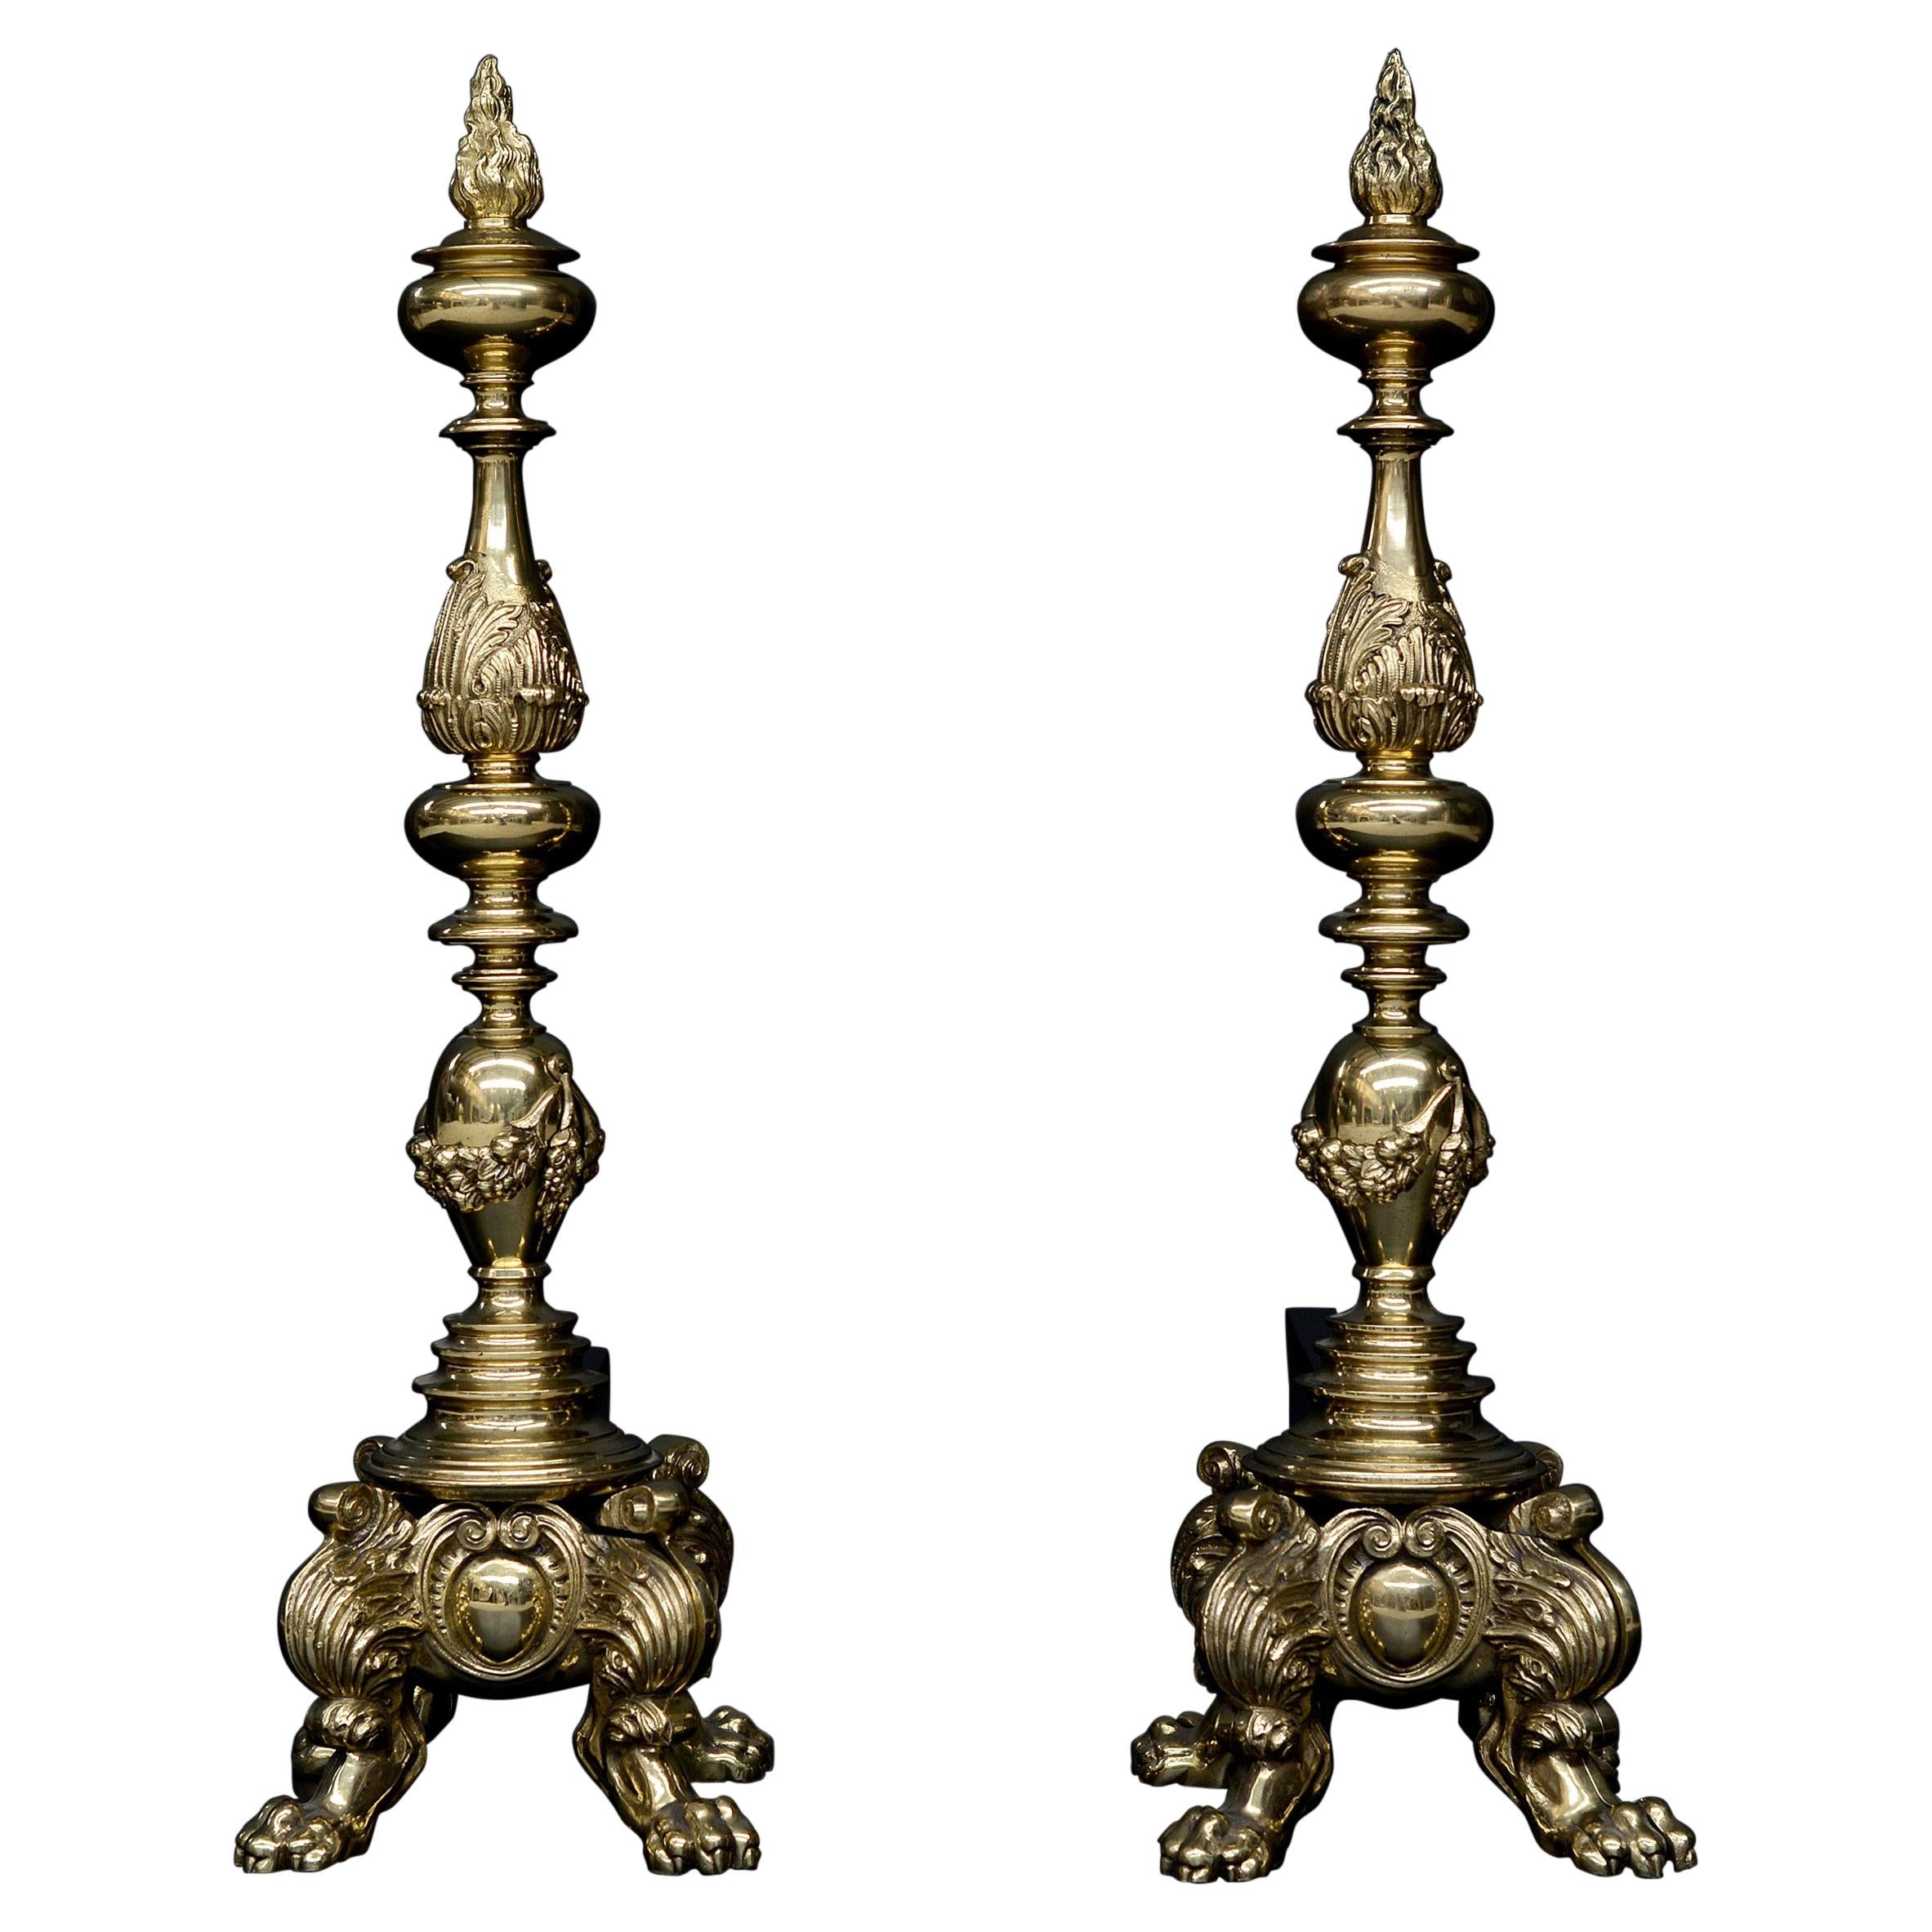 Large Pair of Ornate Brass Firedogs For Sale